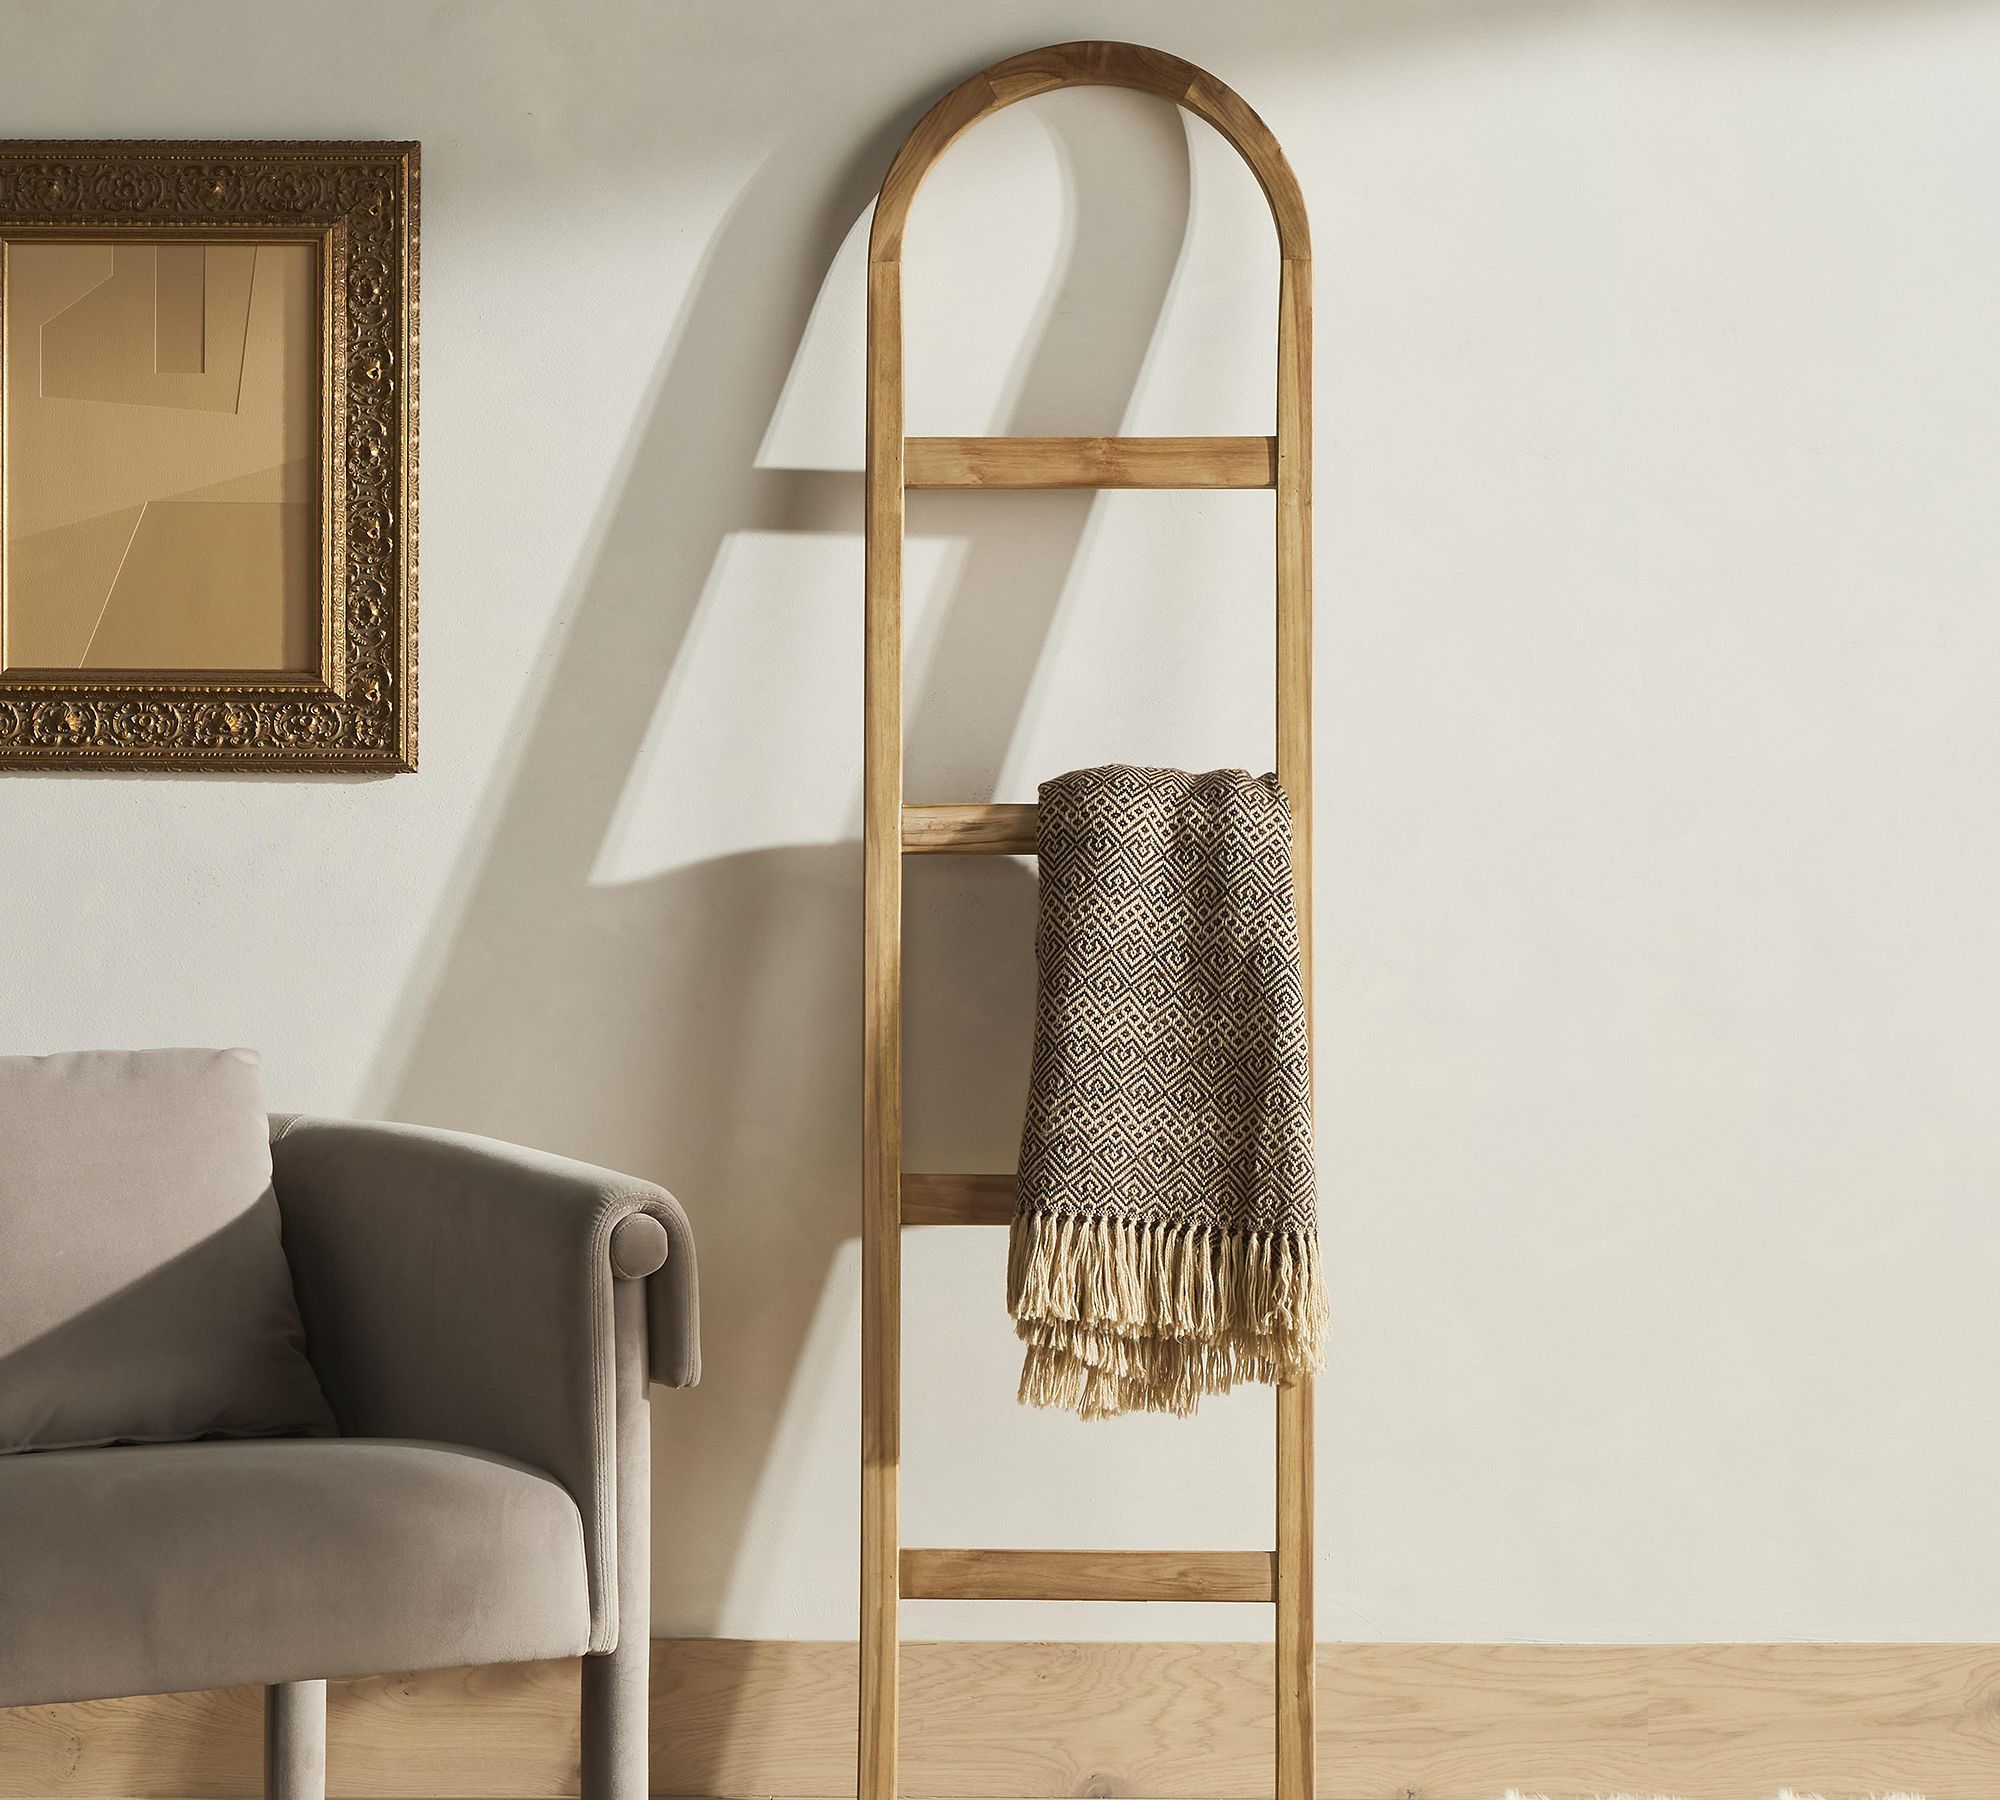 Arched Decorative Ladder